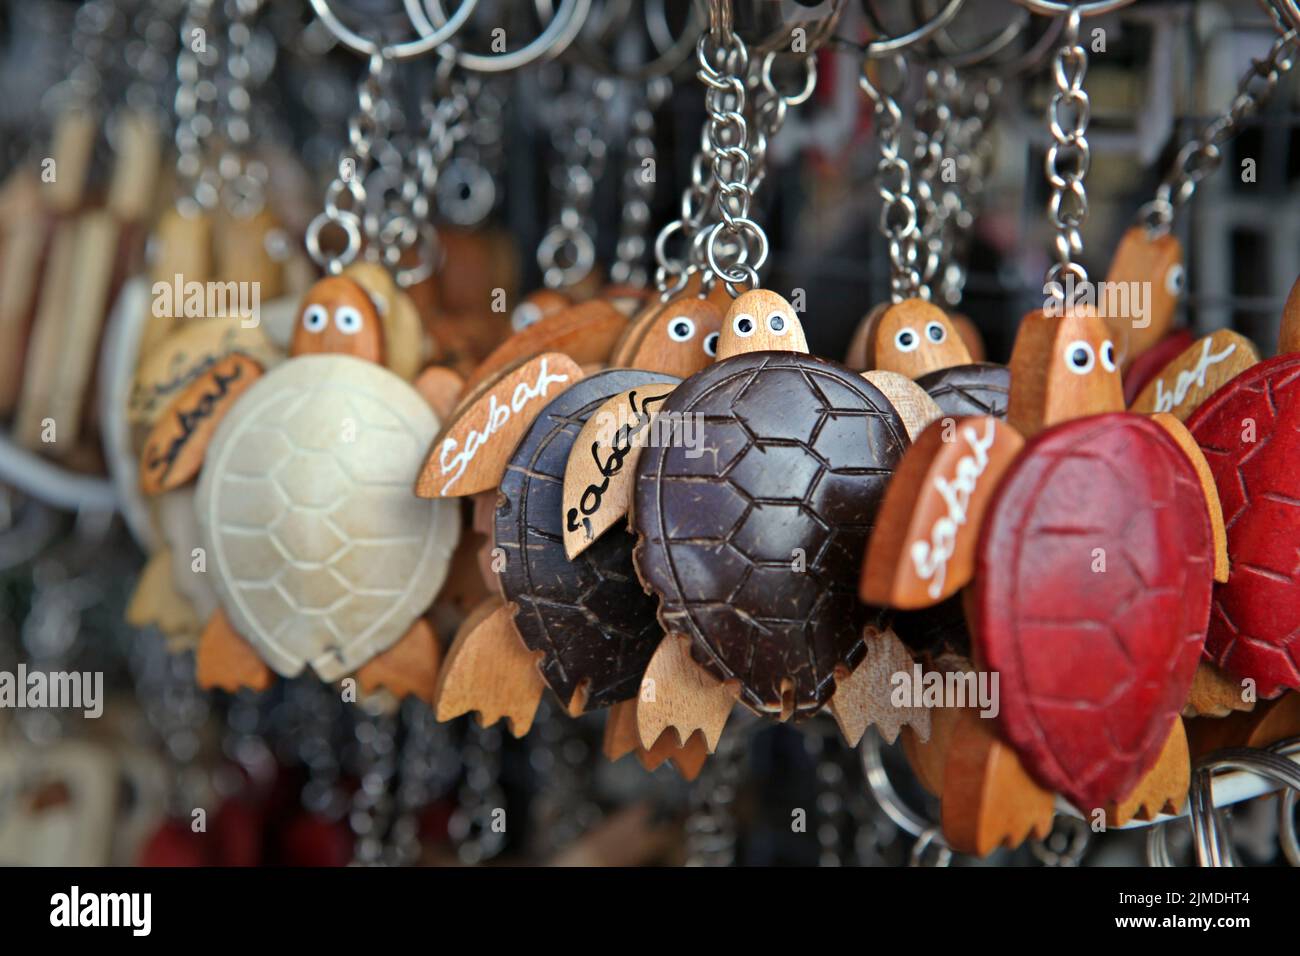 Souvenirs at a shop on the side of a road leading to Kinabalu Park in Sabah, Malaysia. Stock Photo